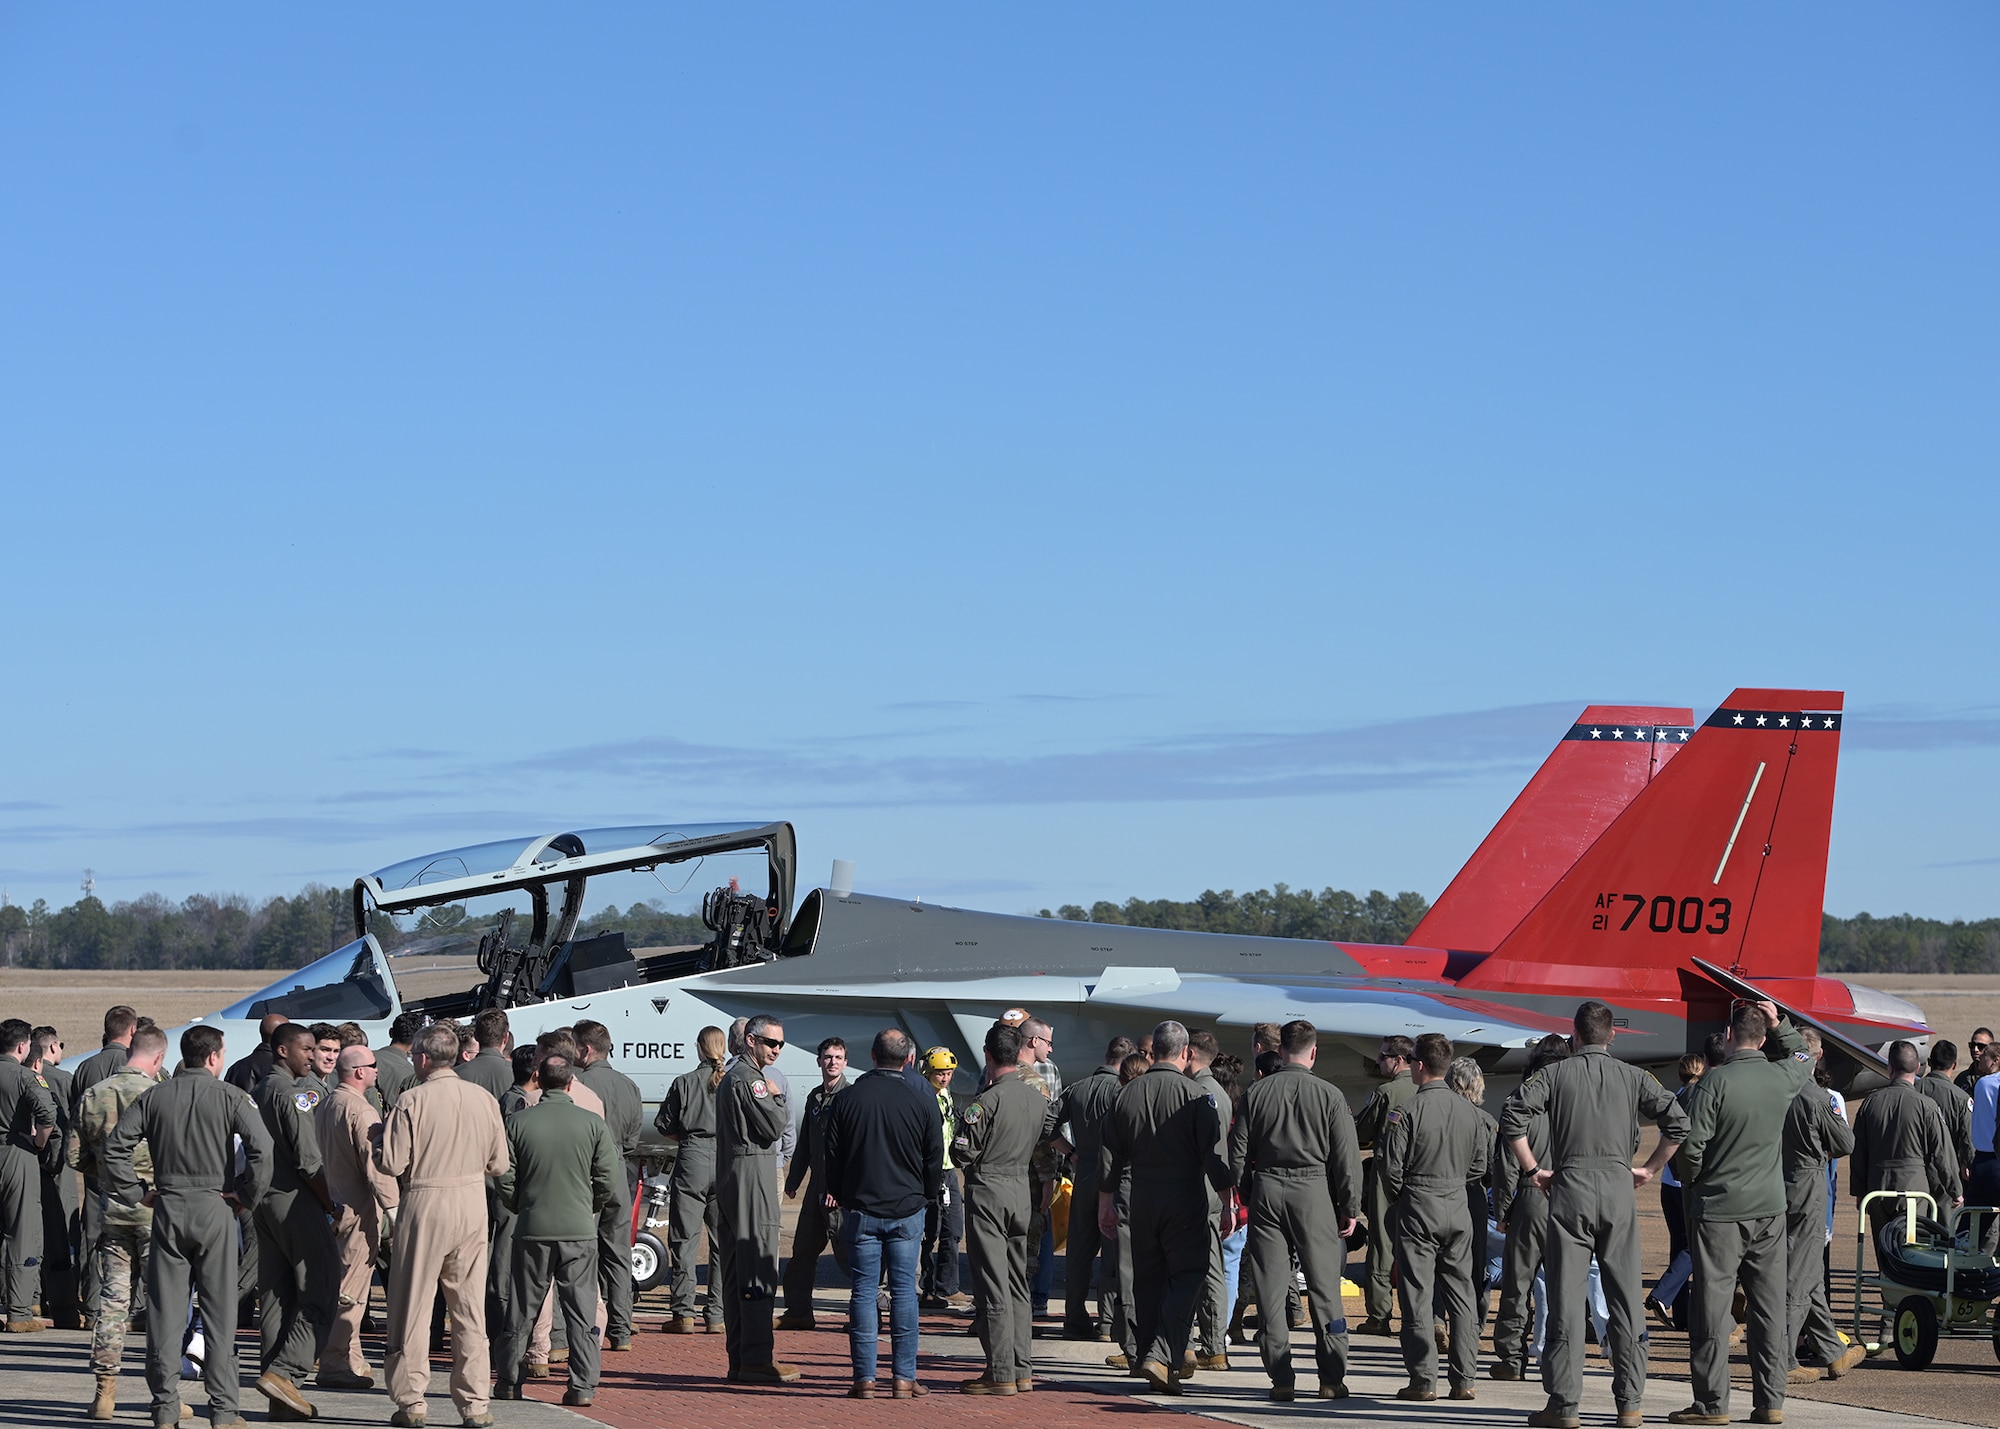 A crowd gathers around the T-7A Red Hawk.